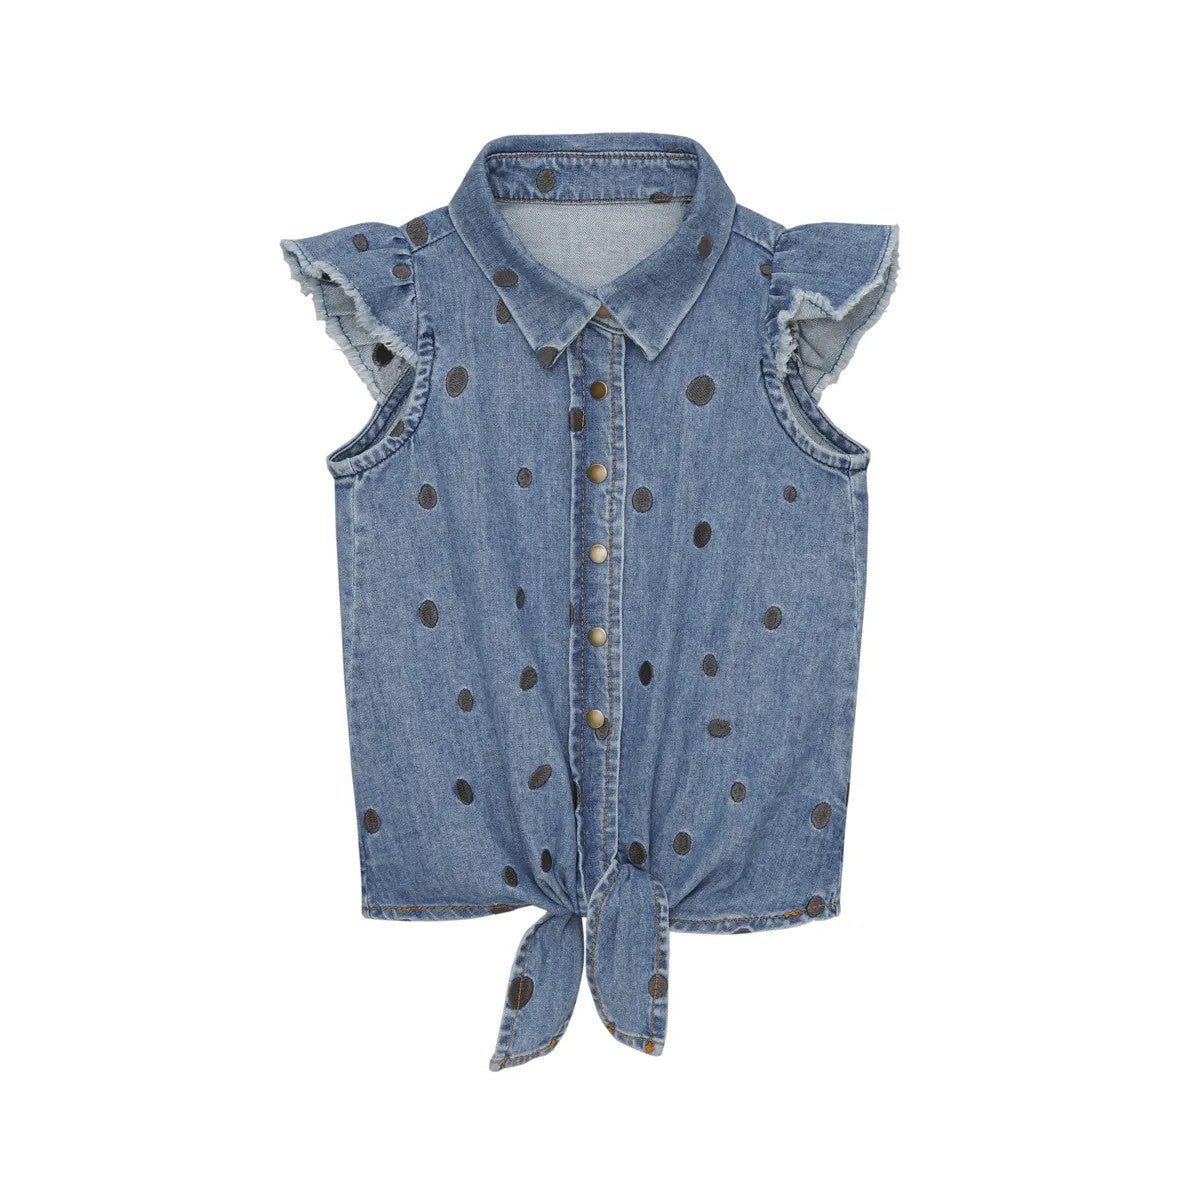 Little Hedonist light blue denim knotted sleeveless shirt with bleached stains. Sustainable kids fashion made from our best organic cotton denim. Superfashion for girls!